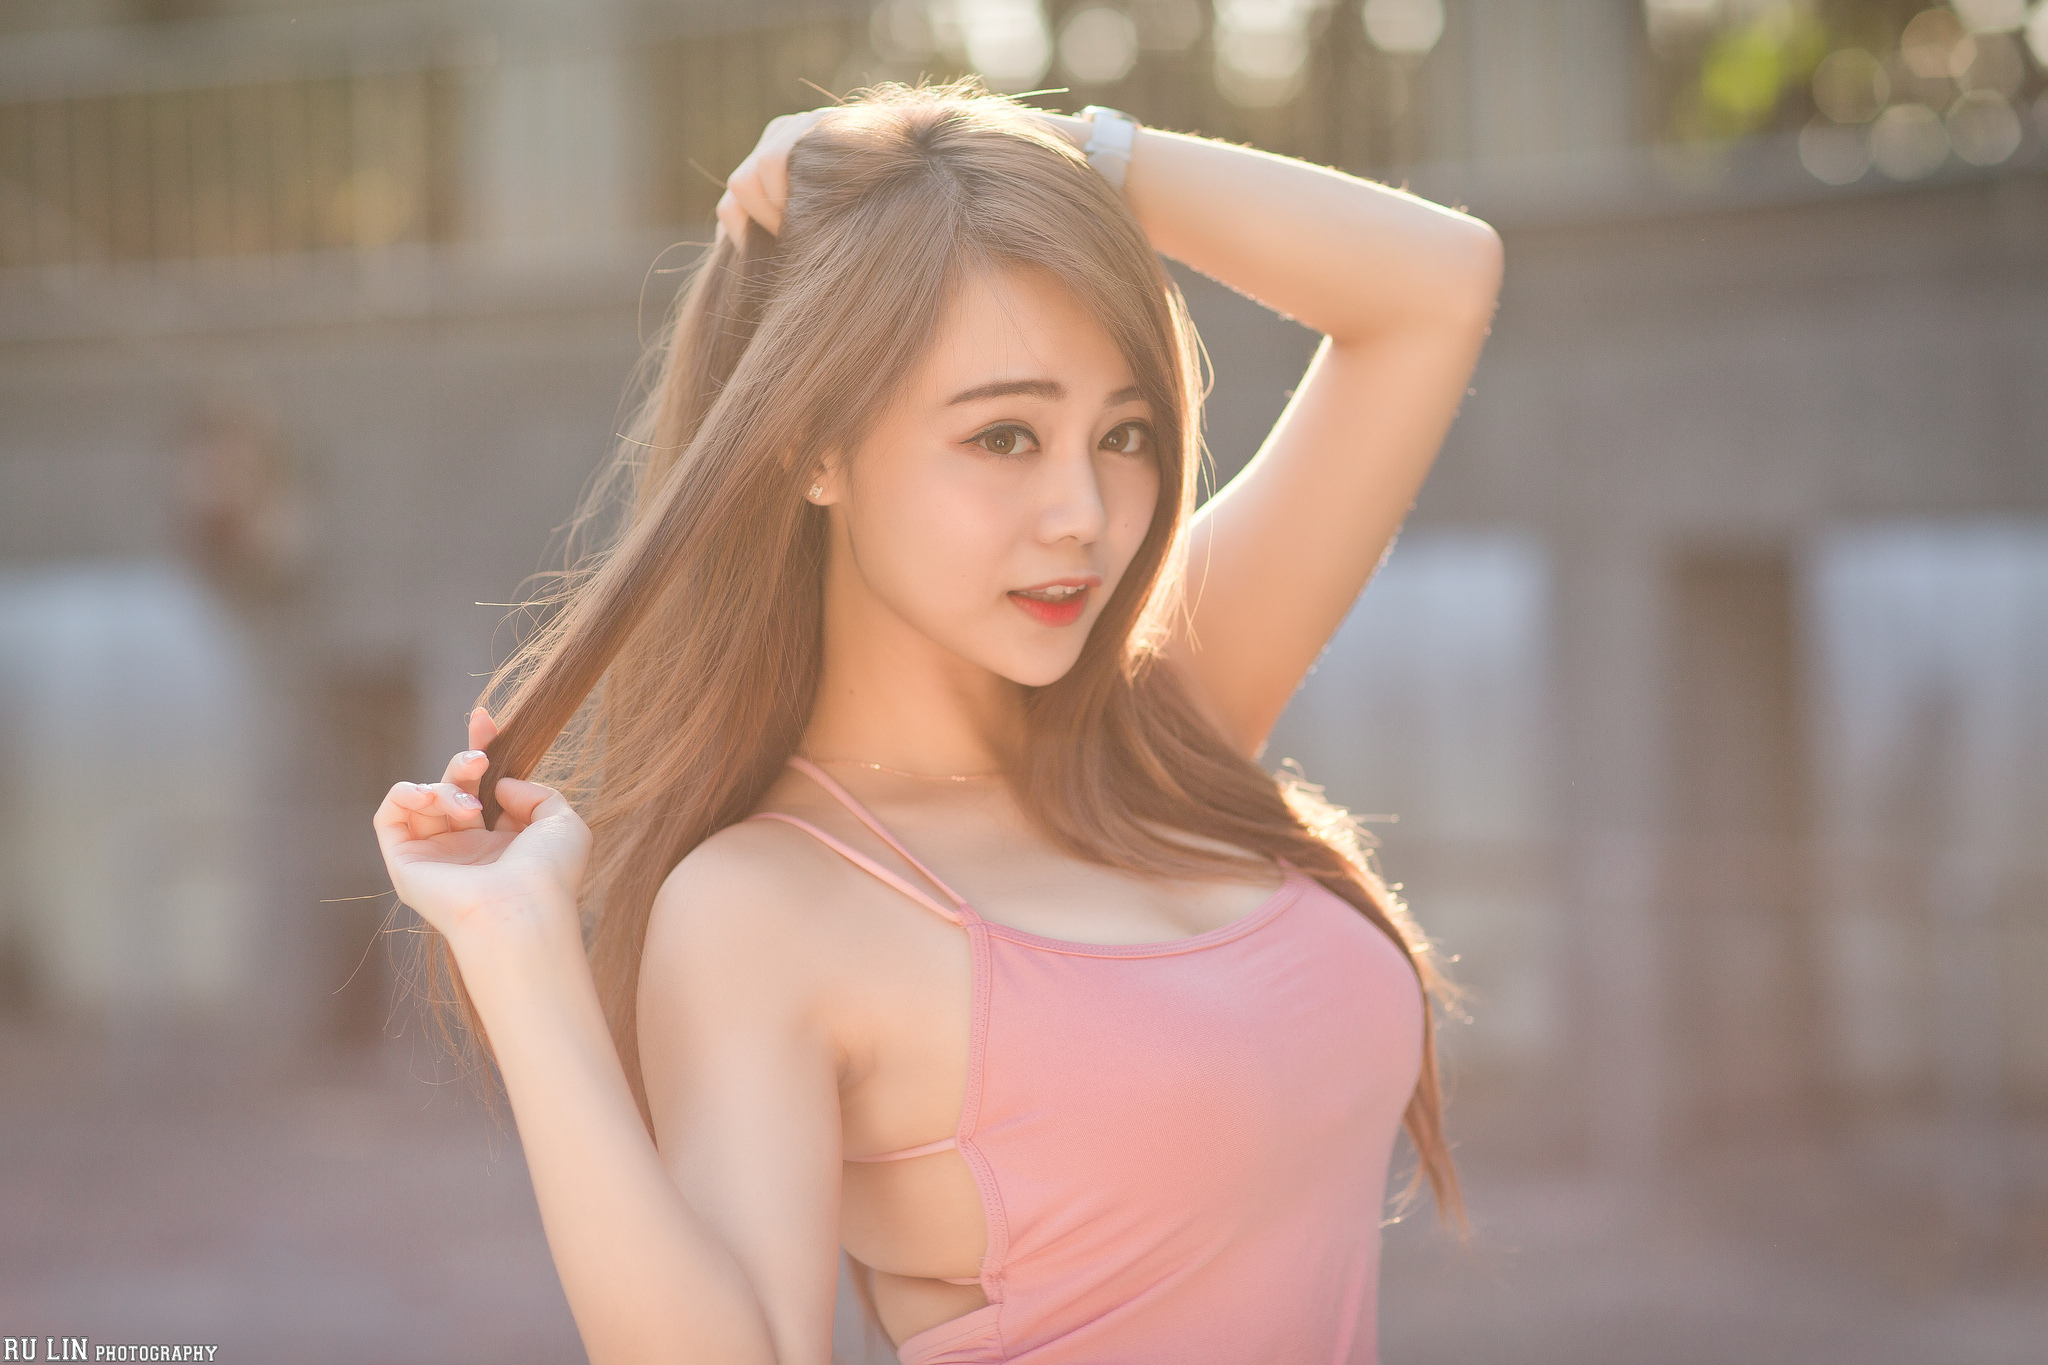 Women Model Brunette Asian Looking At Viewer Portrait Outdoors Tank Top Holding Hair Earring Necklac 2048x1365